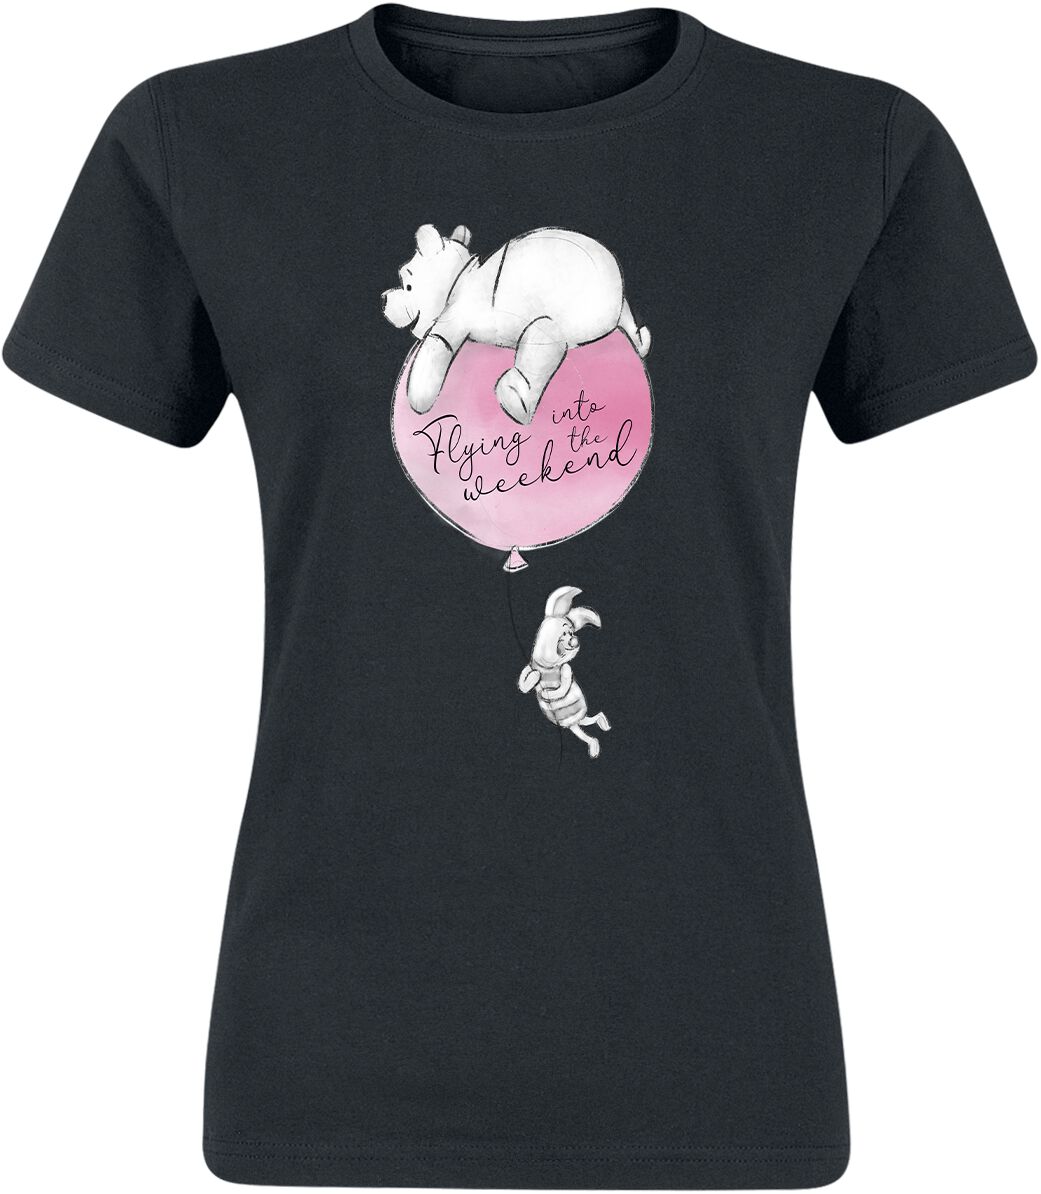 Winnie the Pooh Flying into weekend T-Shirt black